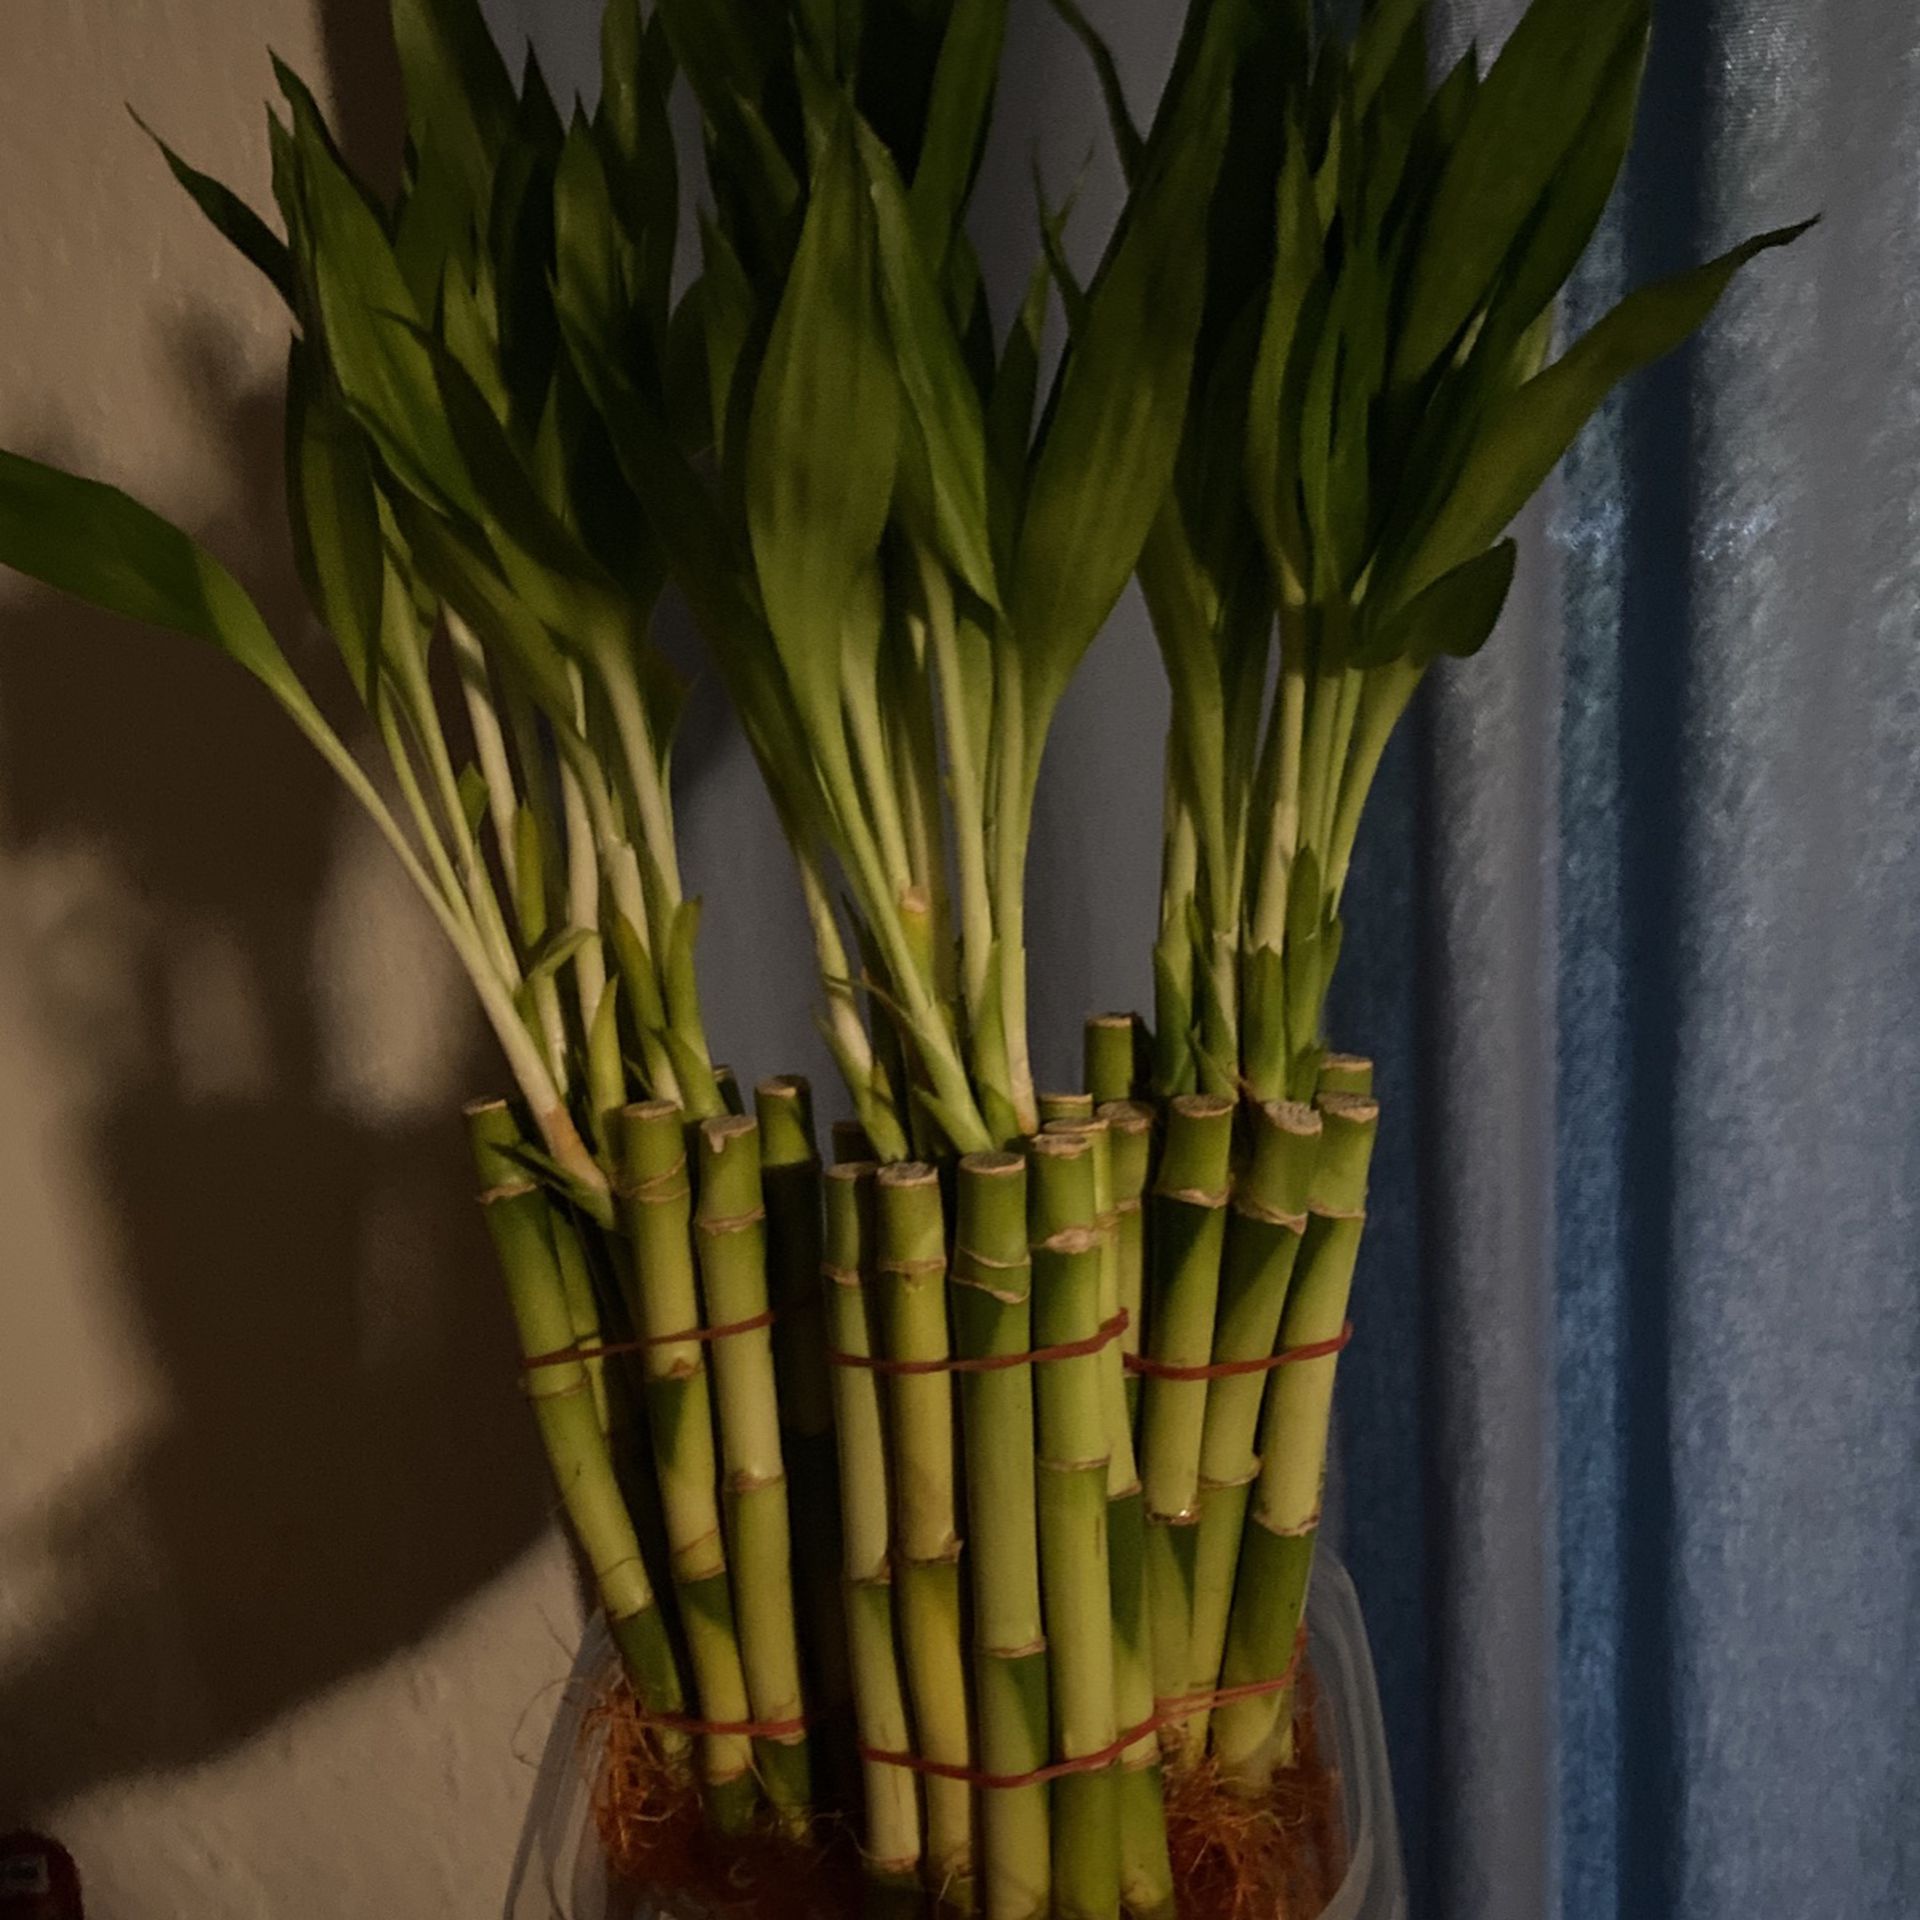 Bamboo Live Plant  Indoor 6" Lucky Bamboo Plant - Bundle of 10 Stalks - Indoor House Plant  $12 Each